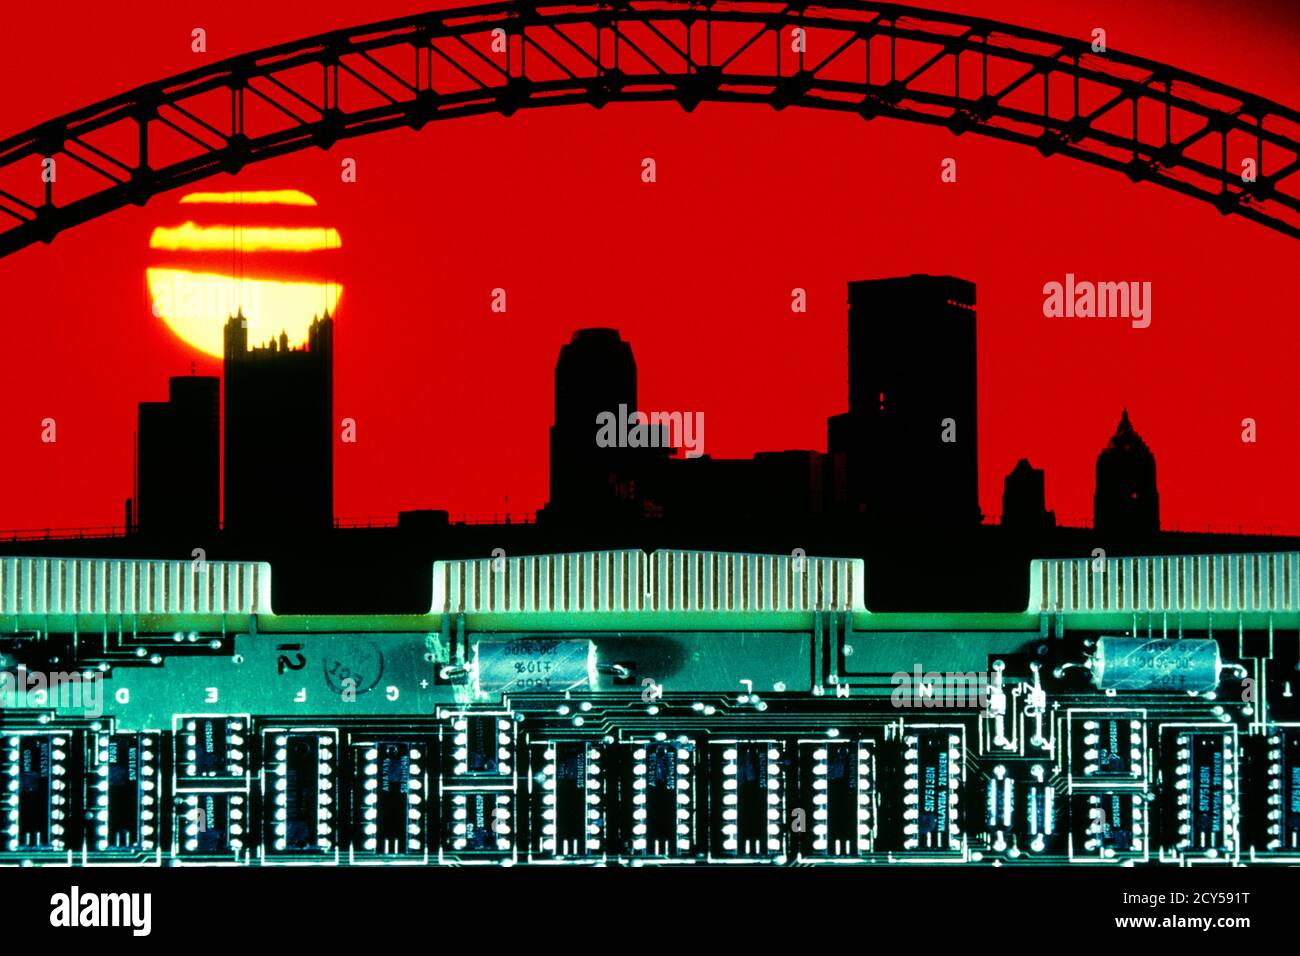 1980s COMPUTER CIRCUIT BOARD RED YELLOW SUNSET AND SILHOUETTED CITY SKYLINE OF PITTSBURGH PA  - ks24709 GER002 HARS INNOVATION OPPORTUNITY KEYSTONE MID-ATLANTIC REAL ESTATE CONCEPTUAL STRUCTURES SUNRISE CITIES KEYSTONE STATE EDIFICE MID-ATLANTIC STATE SYMBOLIC CIRCUIT CREATIVITY GROWTH IRONWORK SOLUTIONS BRIDGES COMPUTING OLD FASHIONED PITTSBURGH Stock Photo